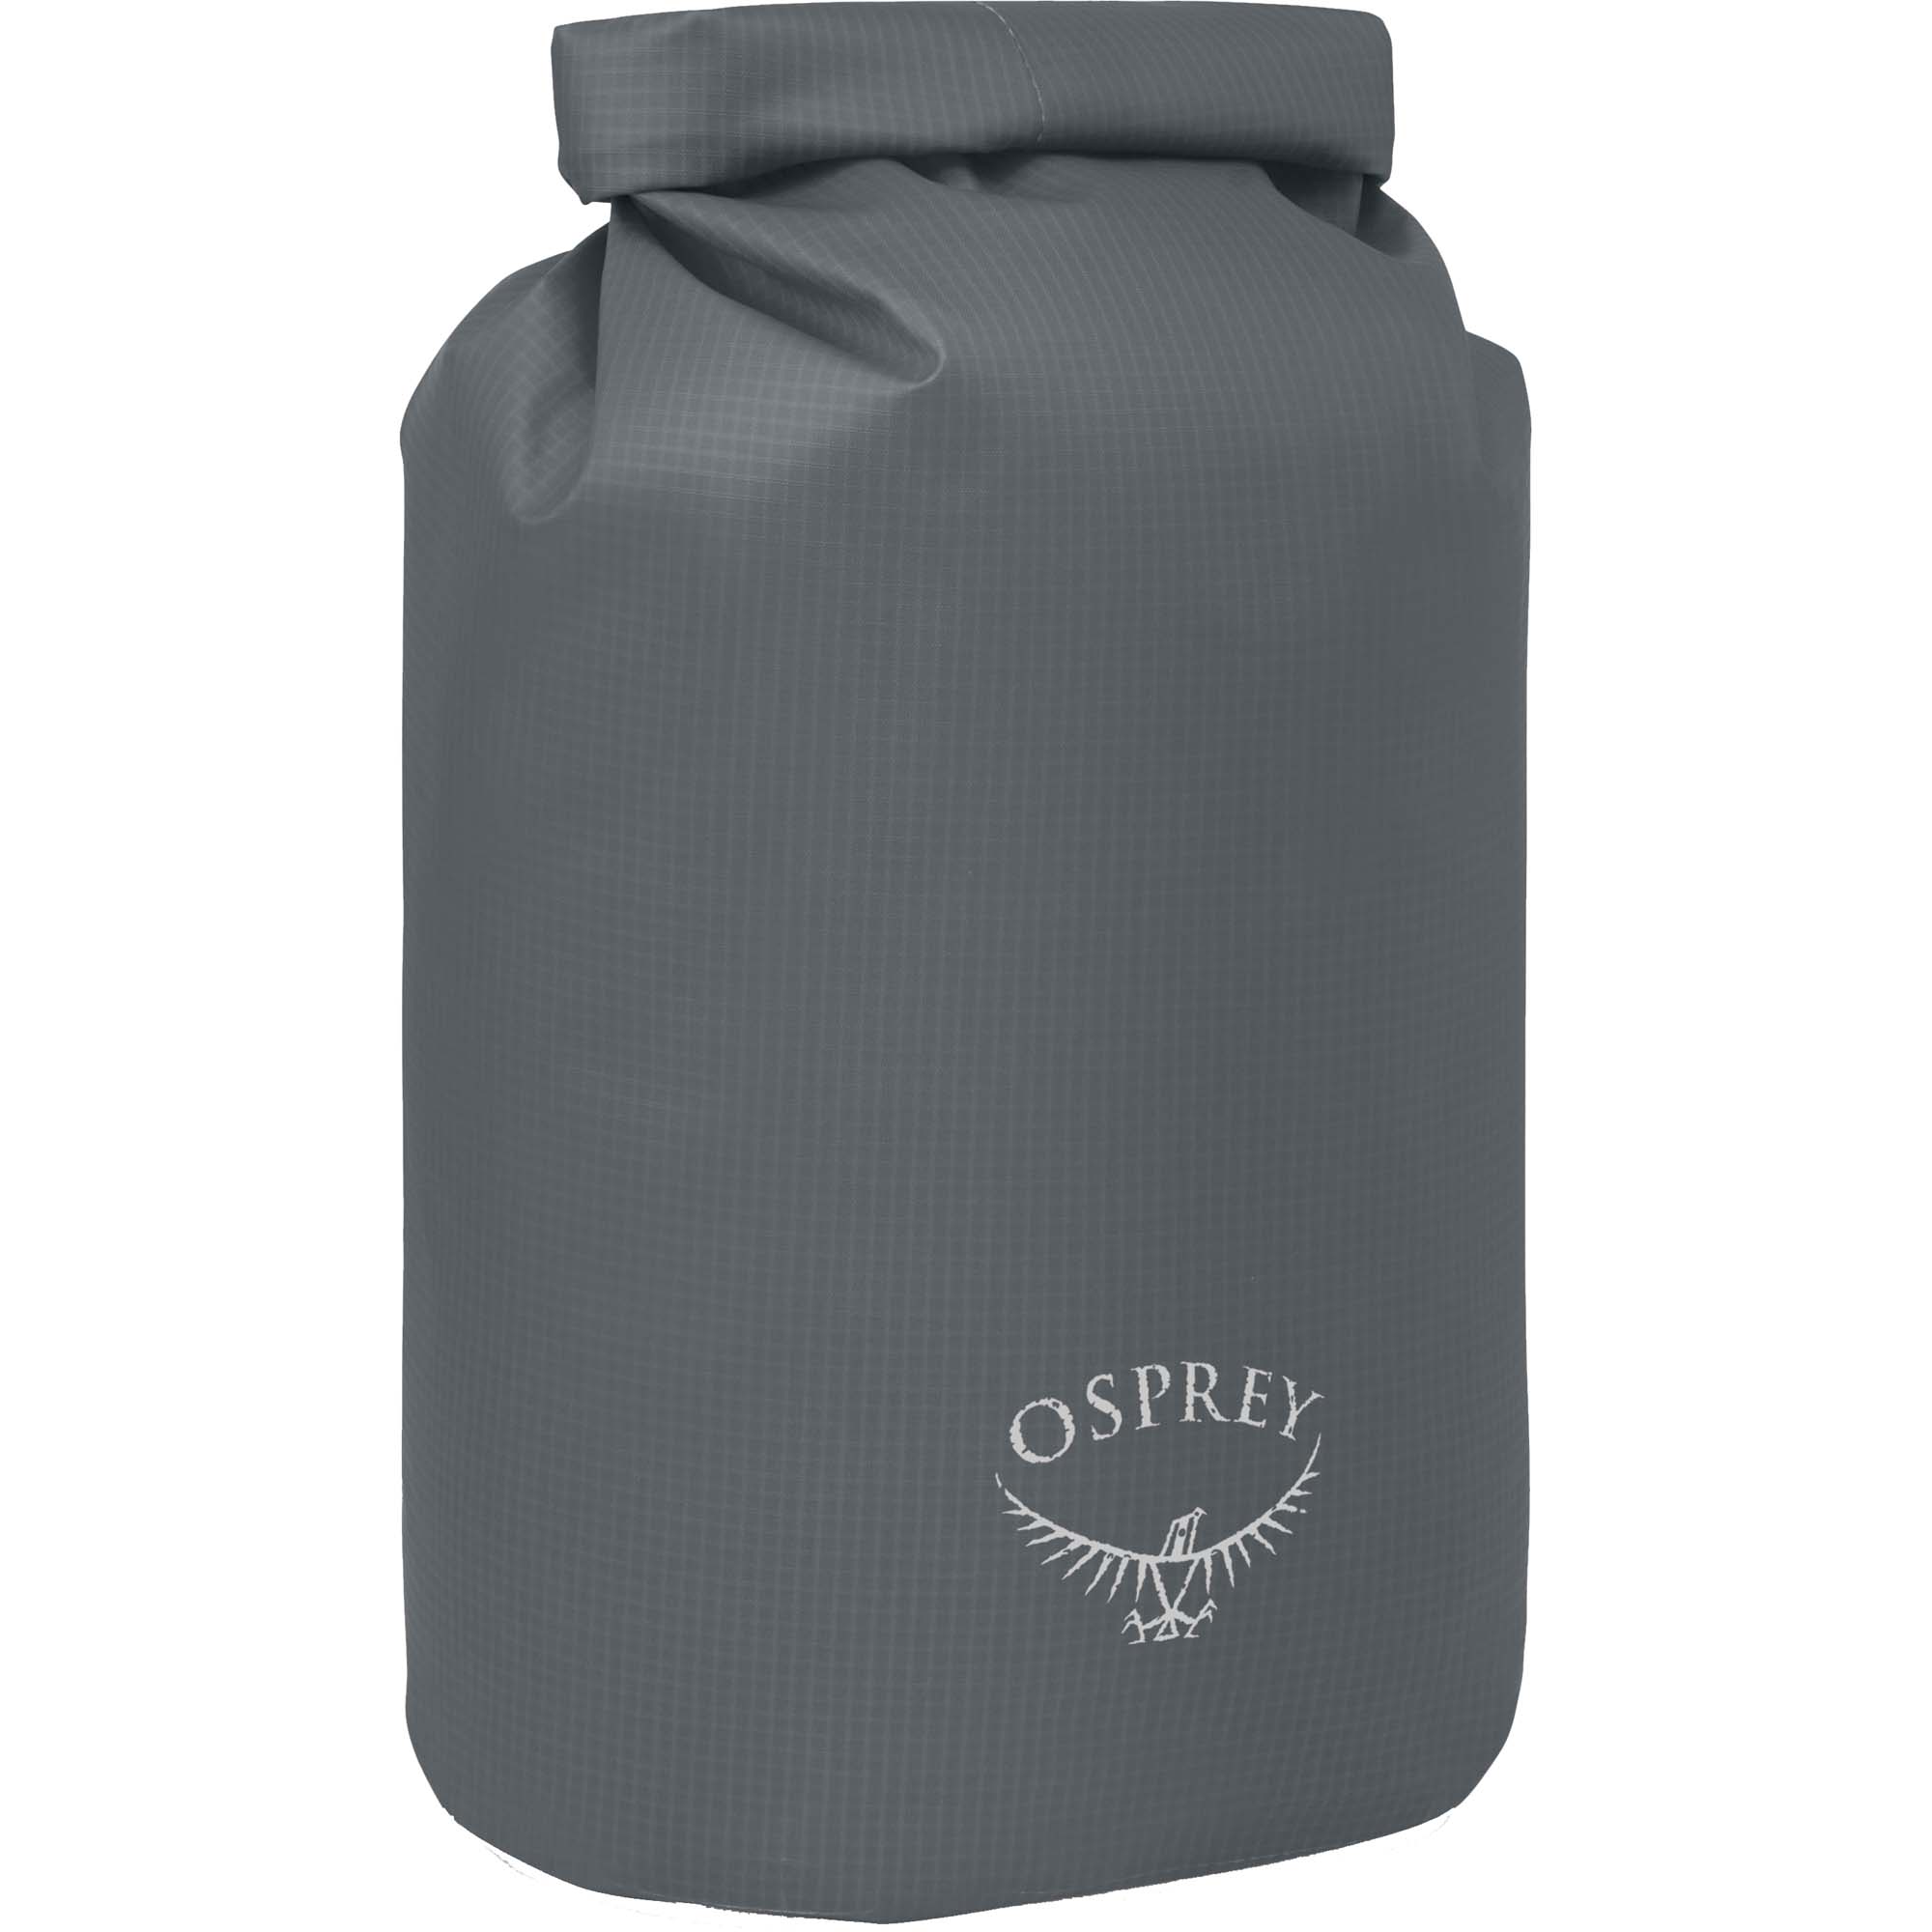 Photos - Dry Bag Osprey Wildwater 15 Waterproof , 15L Tunnel Vision Grey 10005557 